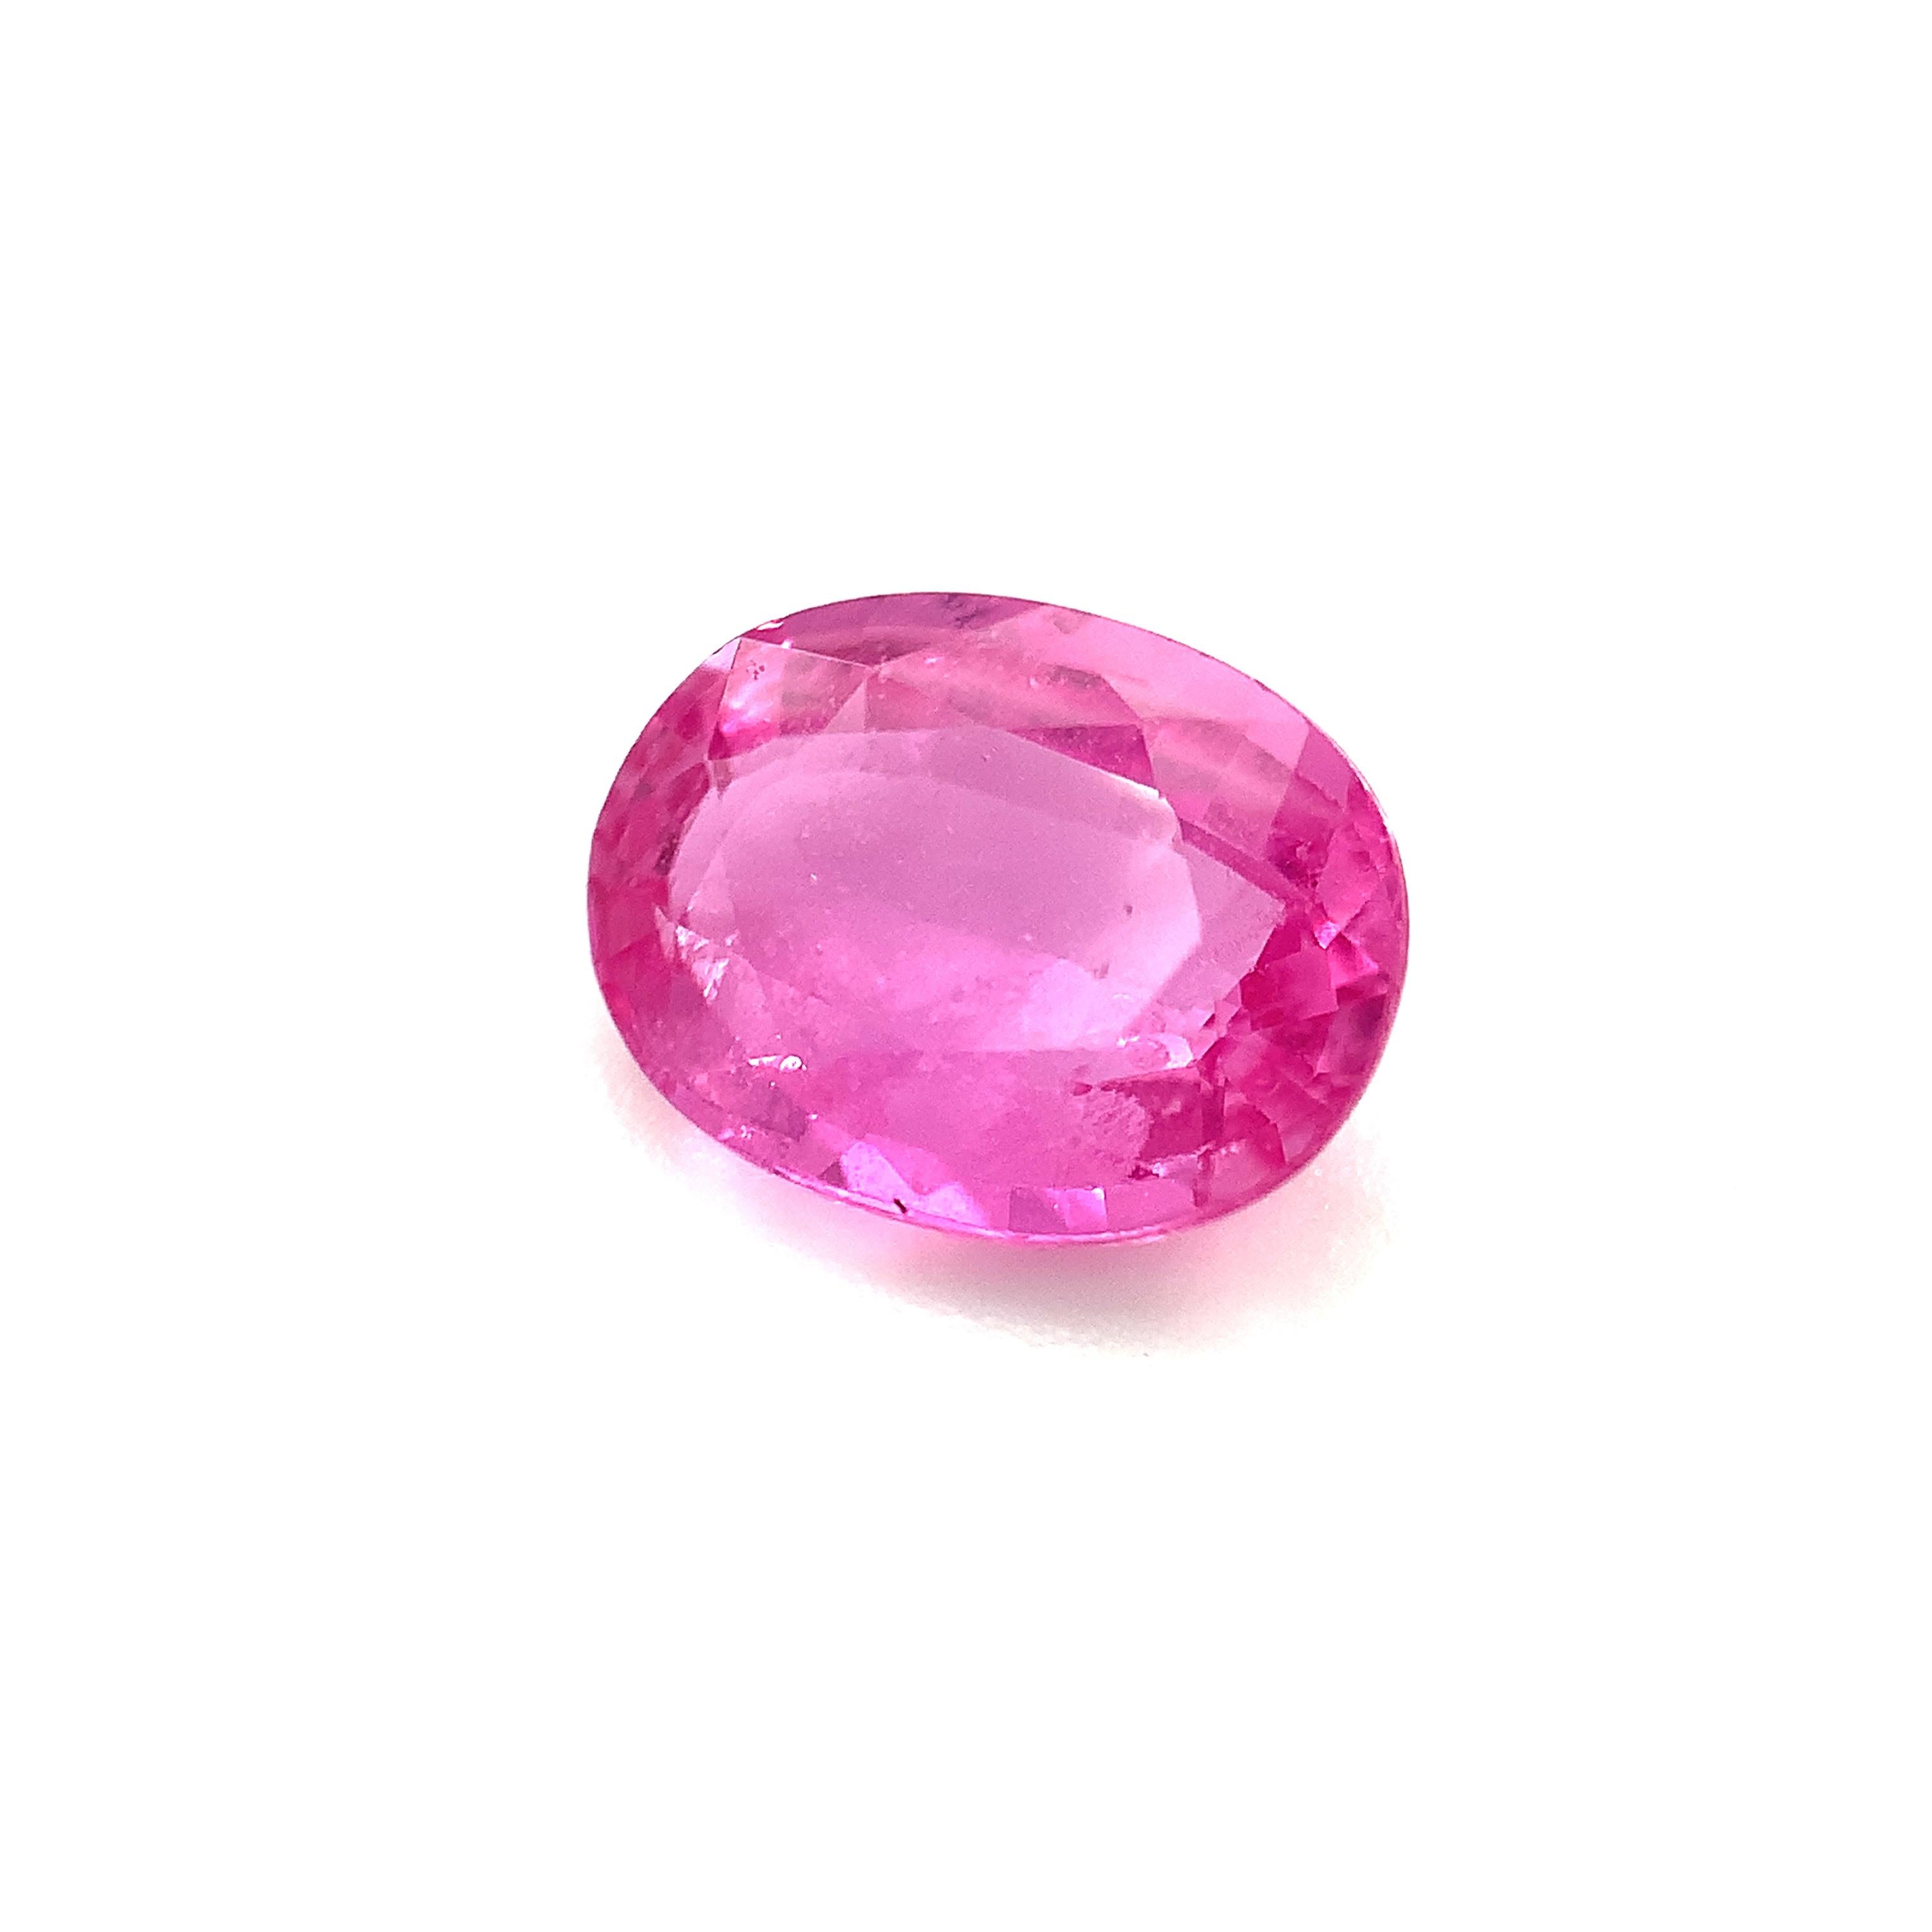 Artisan 2.11 Carat Pink Sapphire Oval, Unset Loose Gemstone, GIA Certified   For Sale